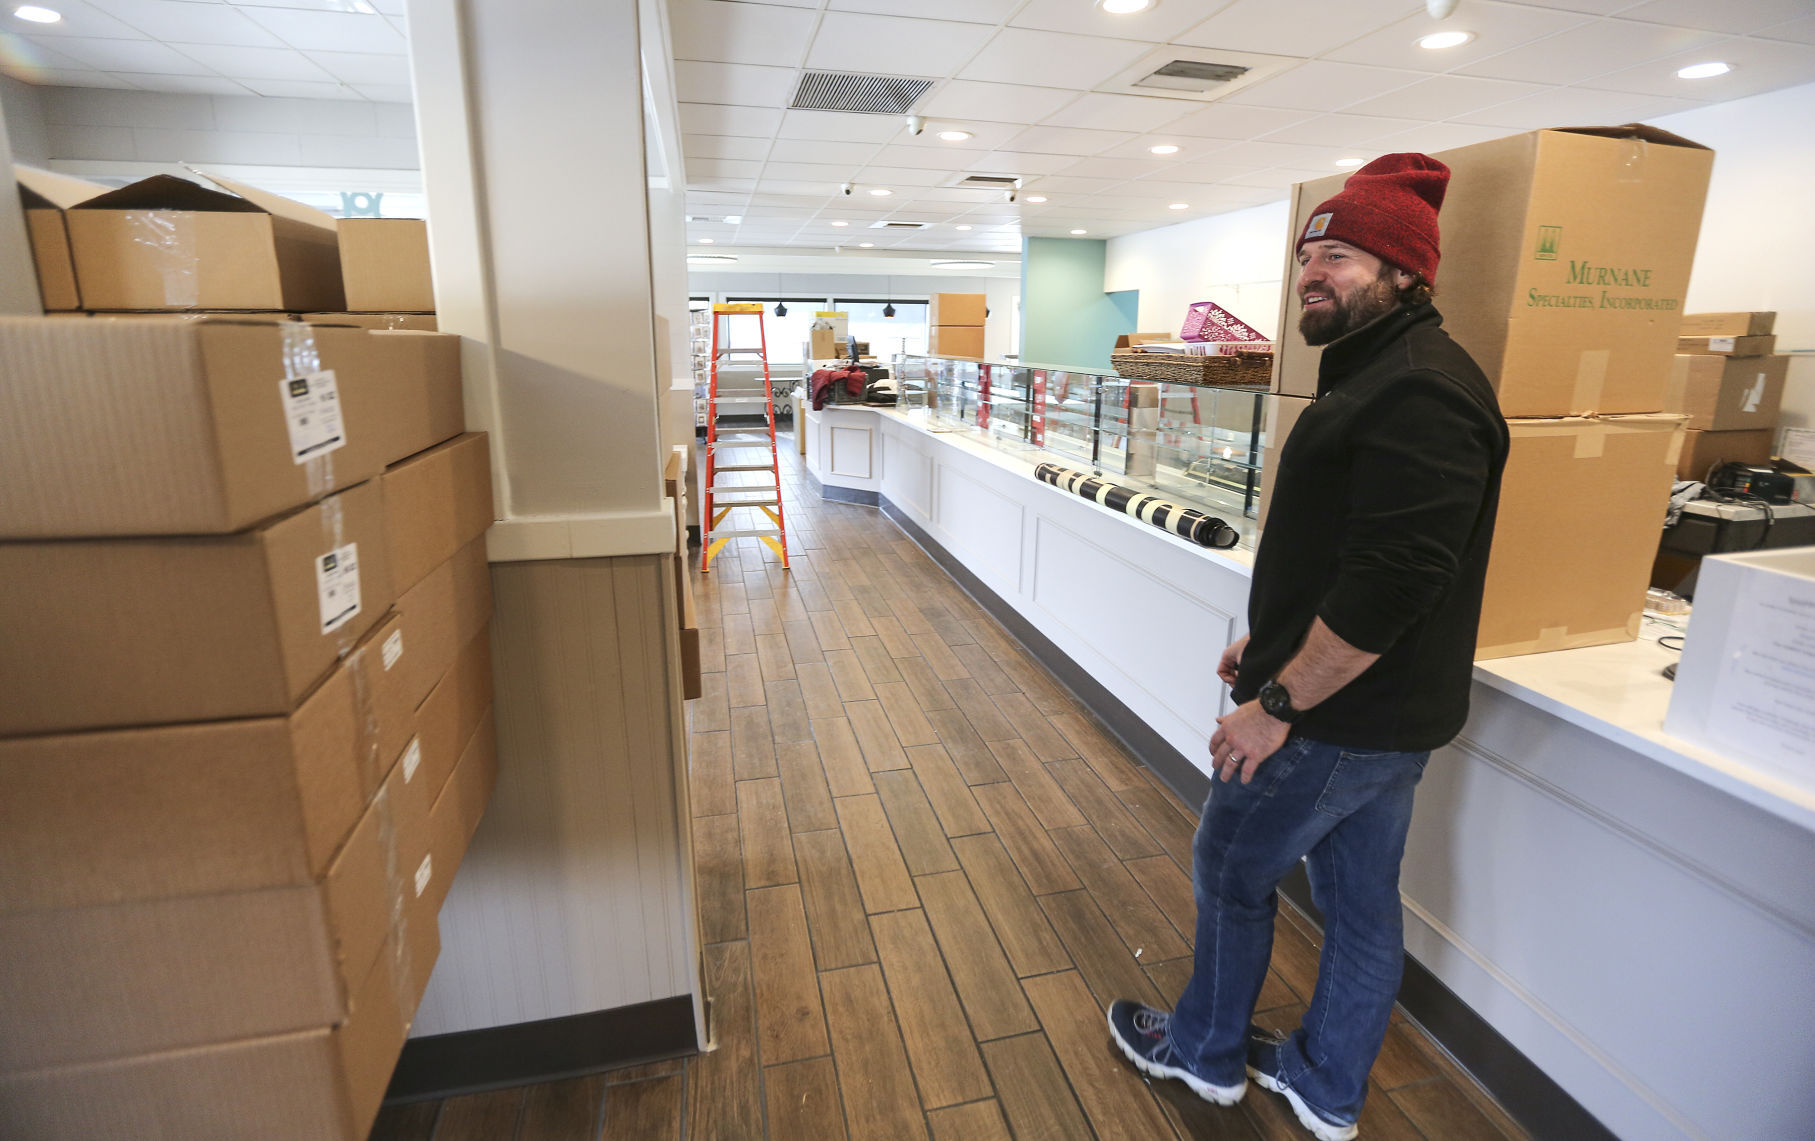 President of Betty Jane Candies, Drew Siegert, walks through the new location on John F. Kennedy Road, Tuesday, Feb. 15, 2022.    PHOTO CREDIT: Dave Kettering/Telegraph Herald